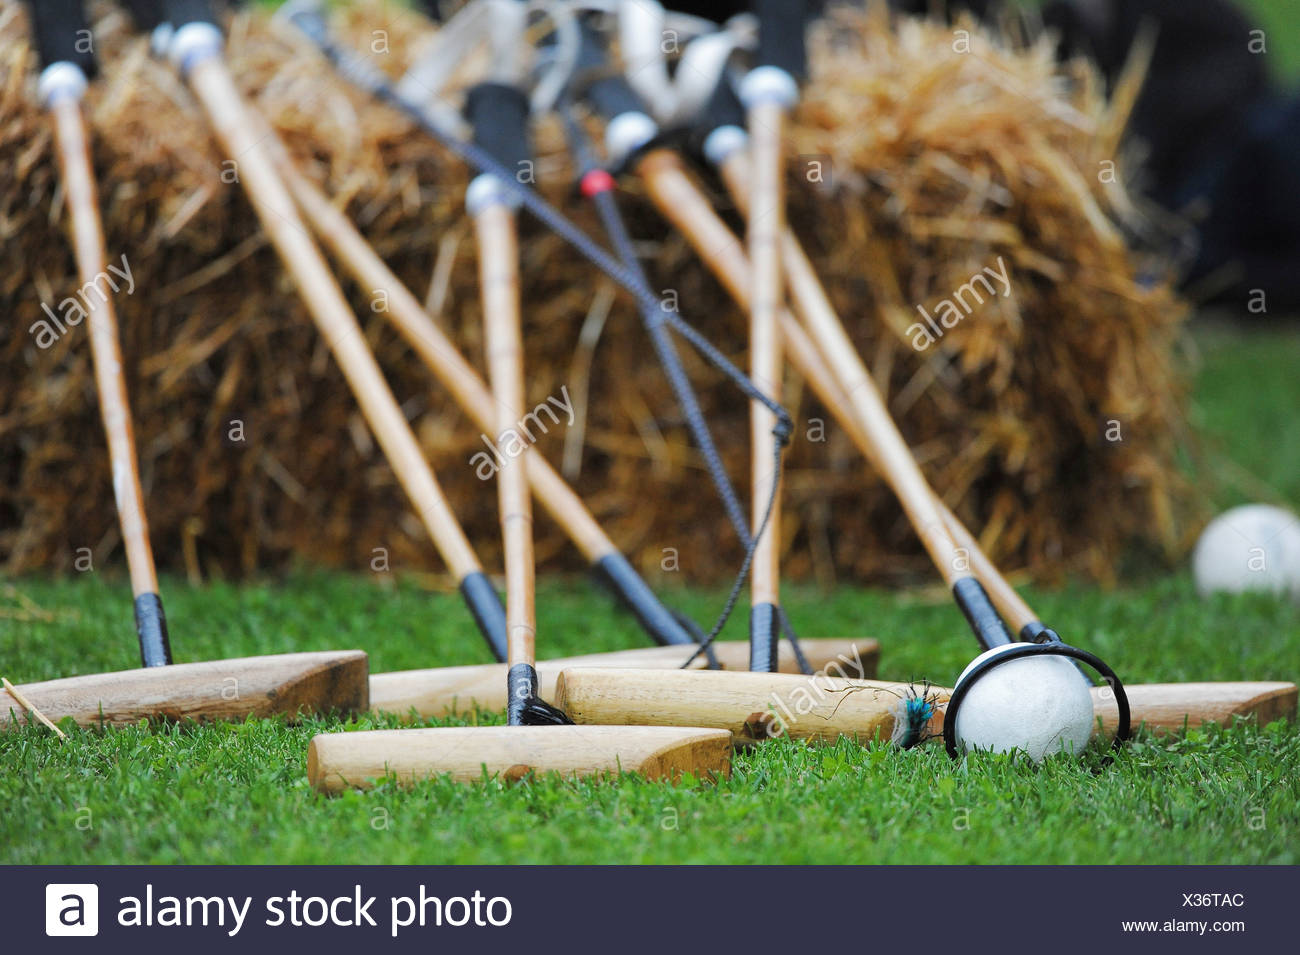 Polo And Mallets High Resolution Stock Photography and Images - Alamy